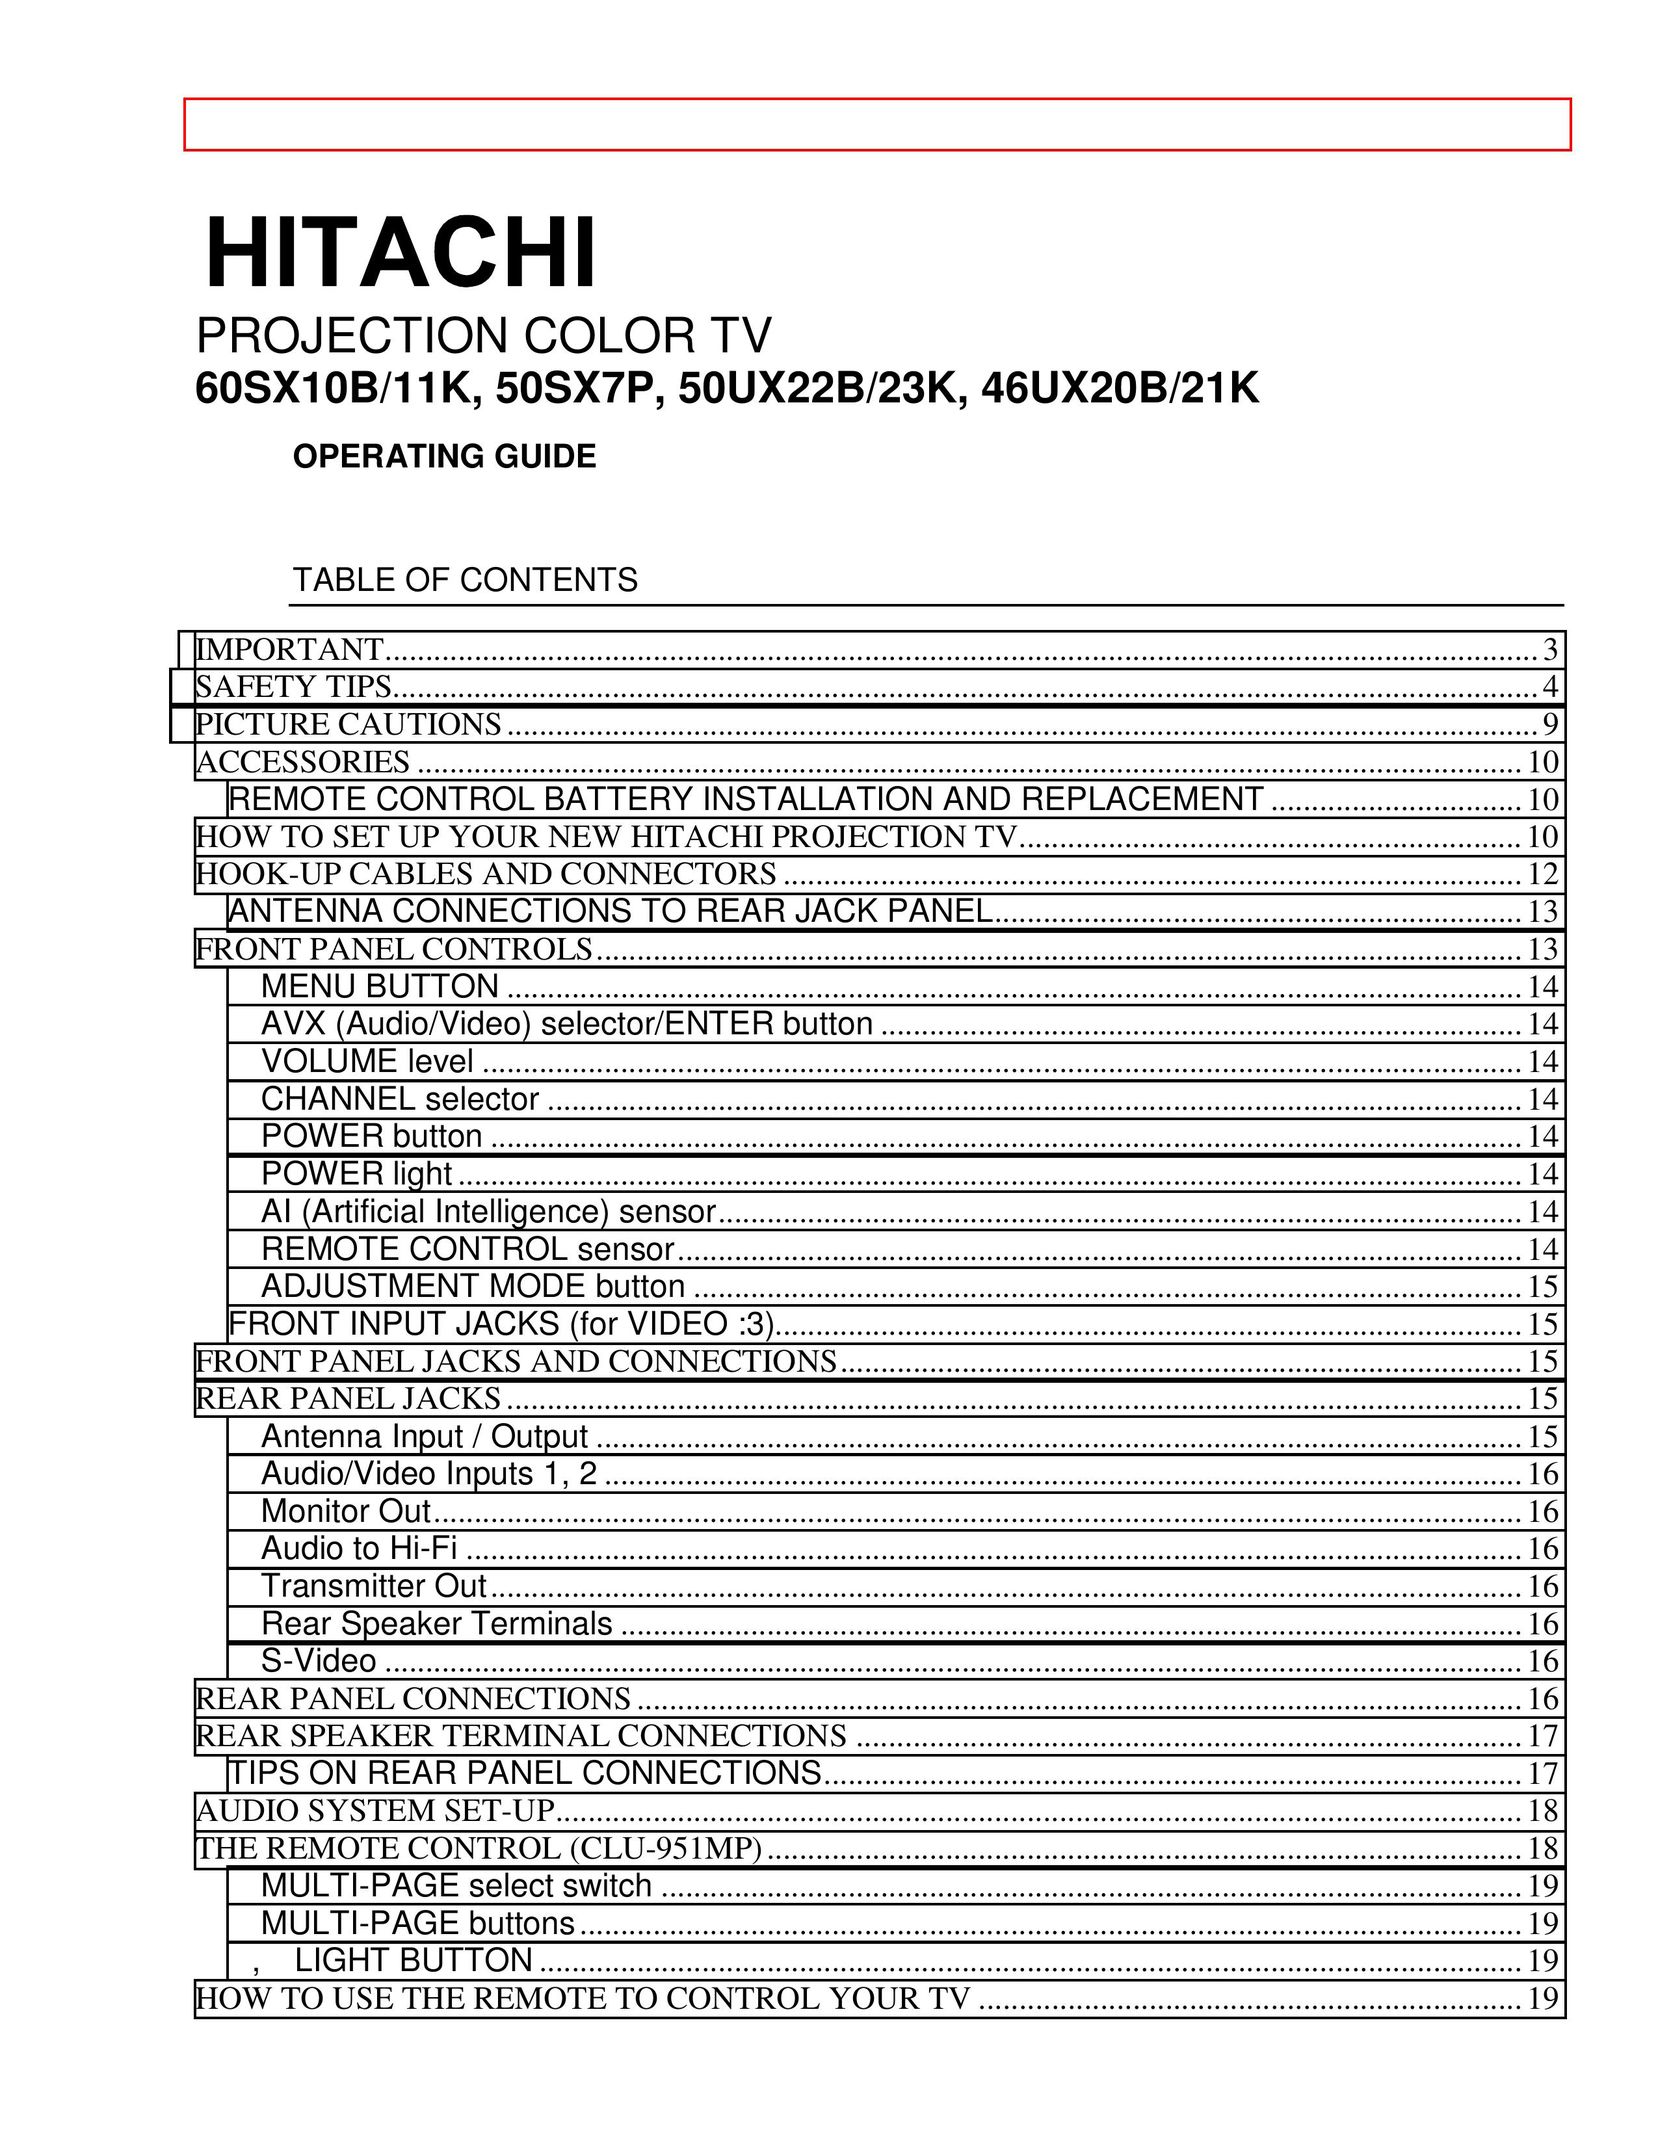 Hitachi 46UX21K Projection Television User Manual